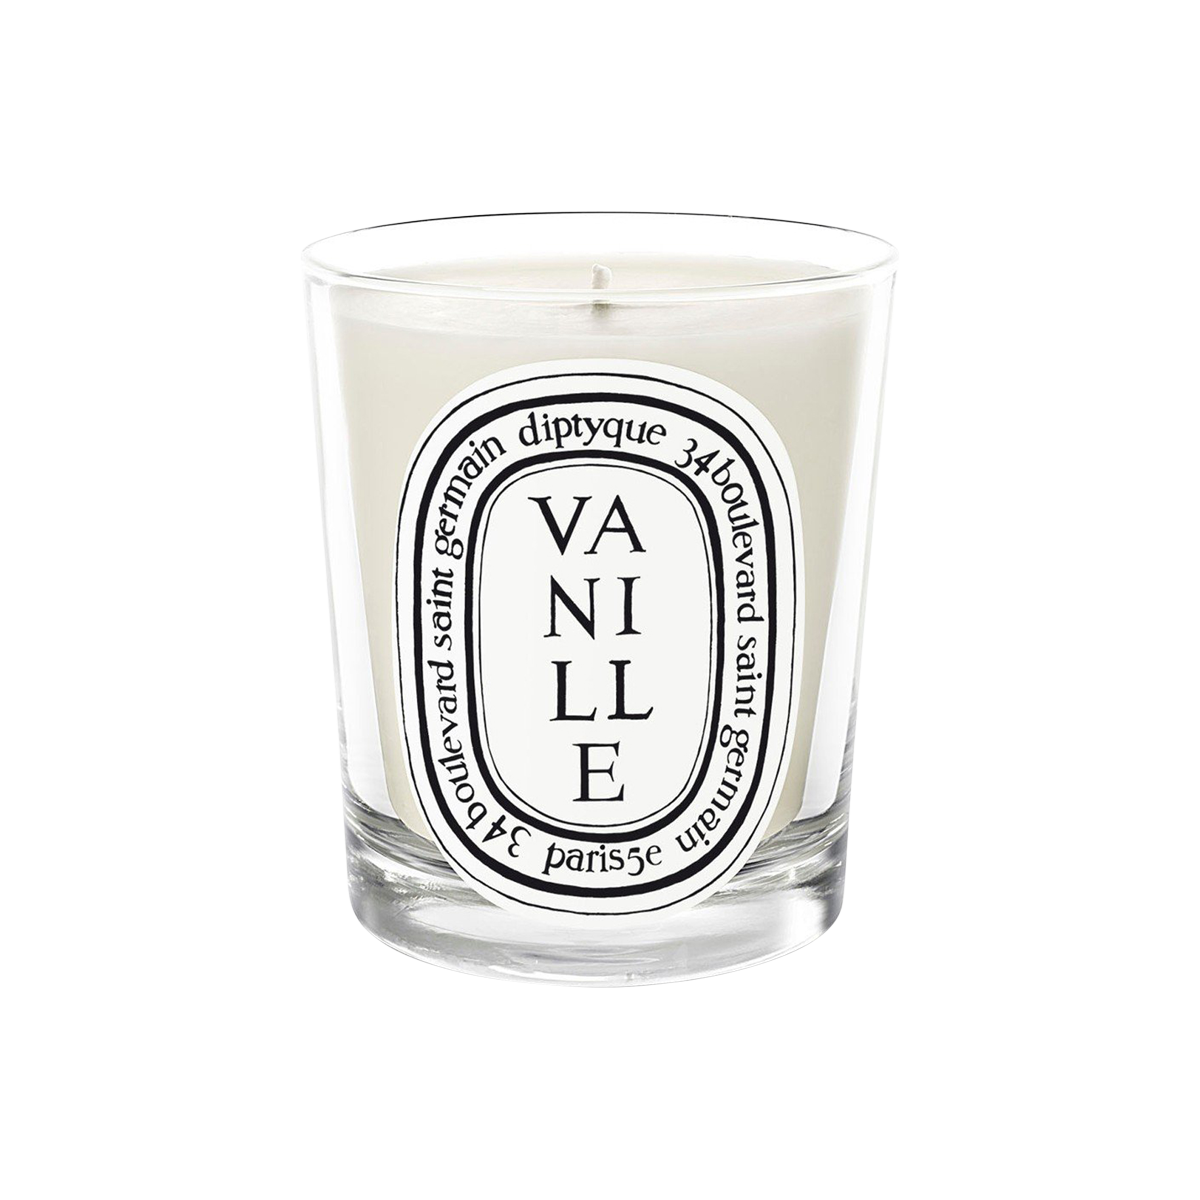 Diptyque - Vanille Scented Candle